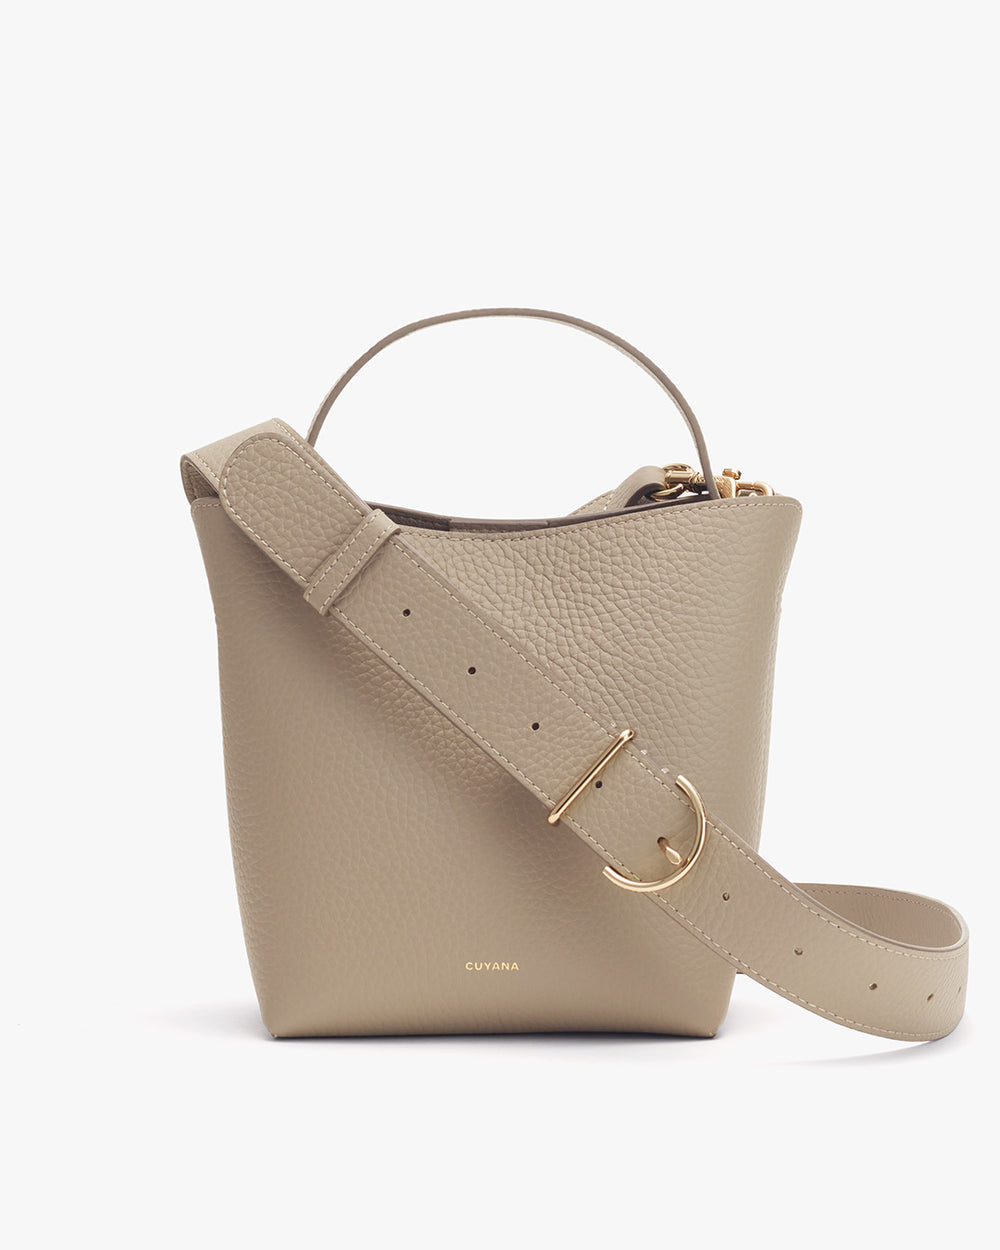 Handbag with a shoulder strap and metal buckle on a plain background.